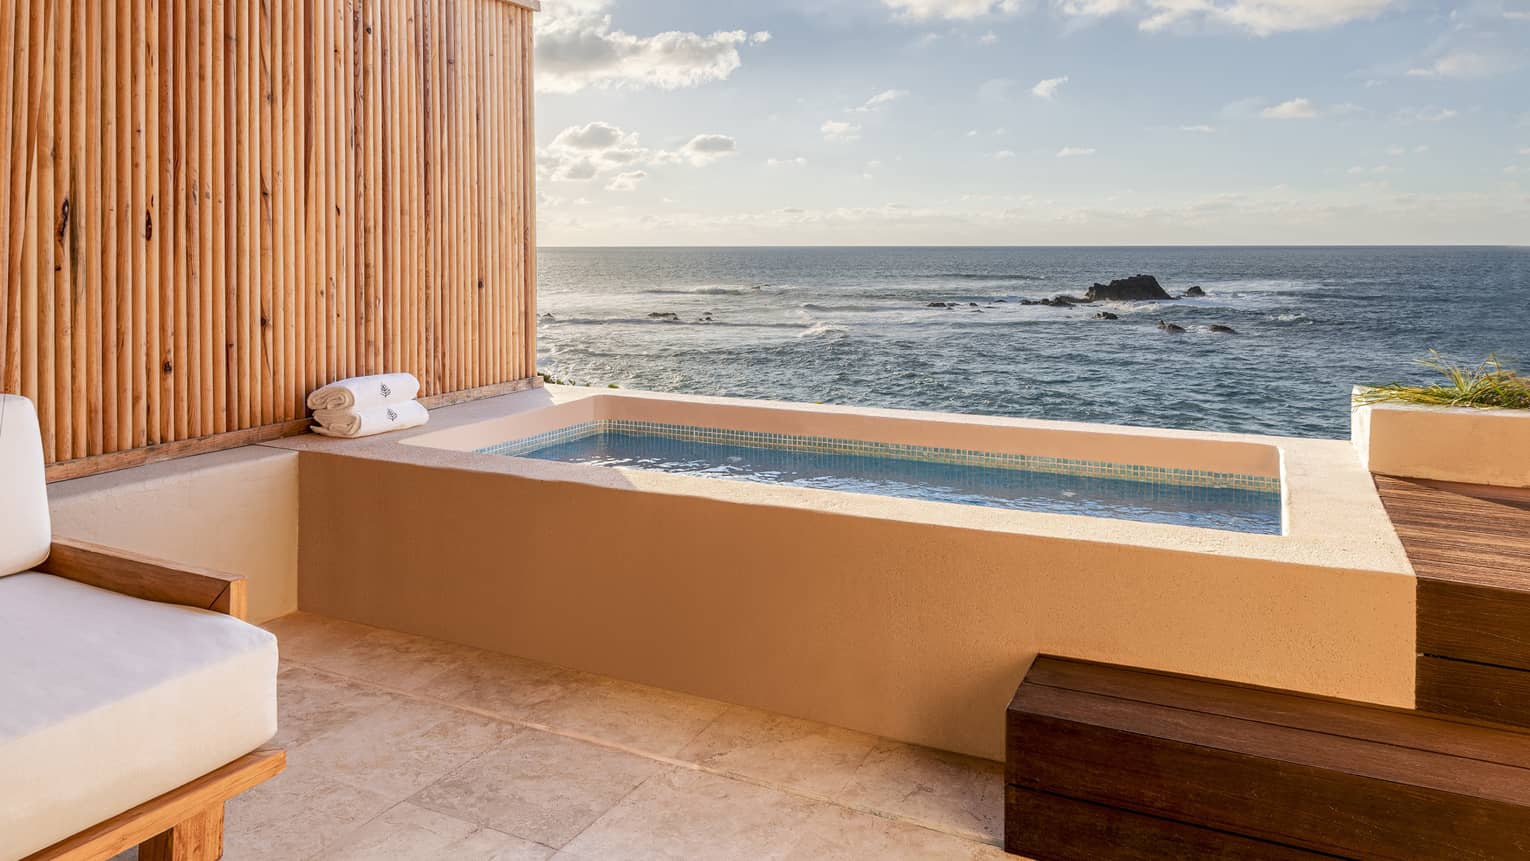 Hotel terrace with private plunge pool and ocean view